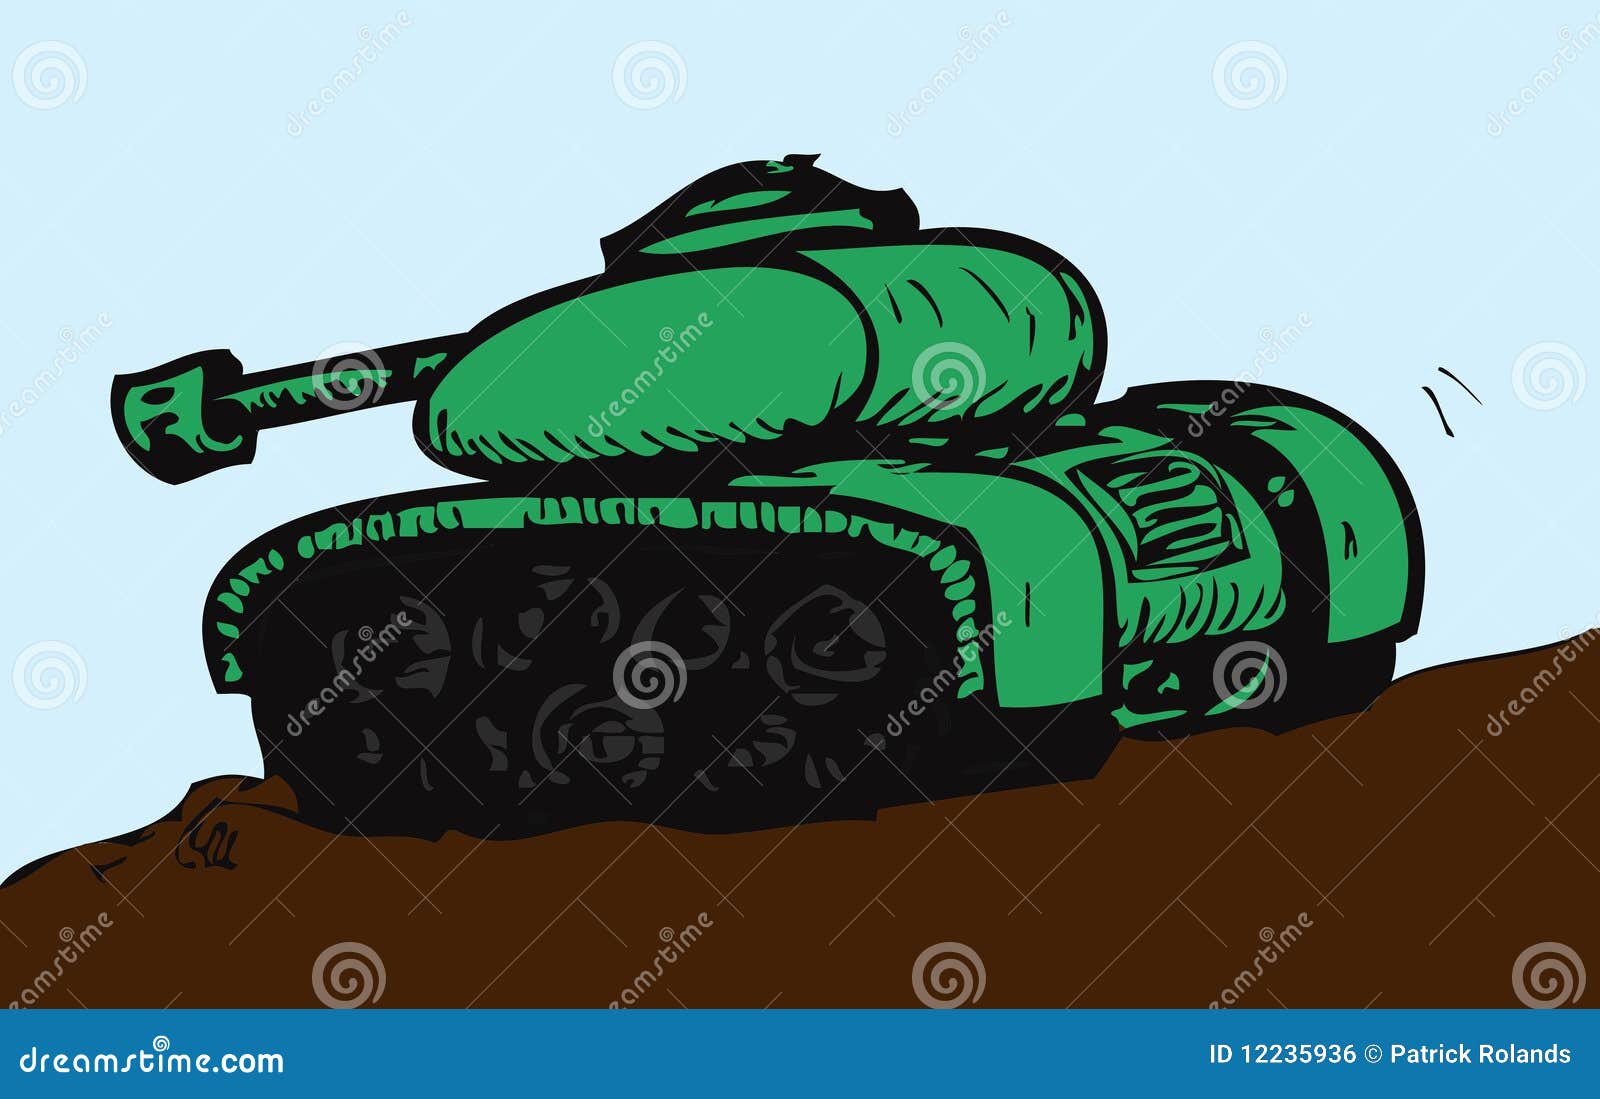 Army tank stock vector. Illustration of attack, treads - 12235936